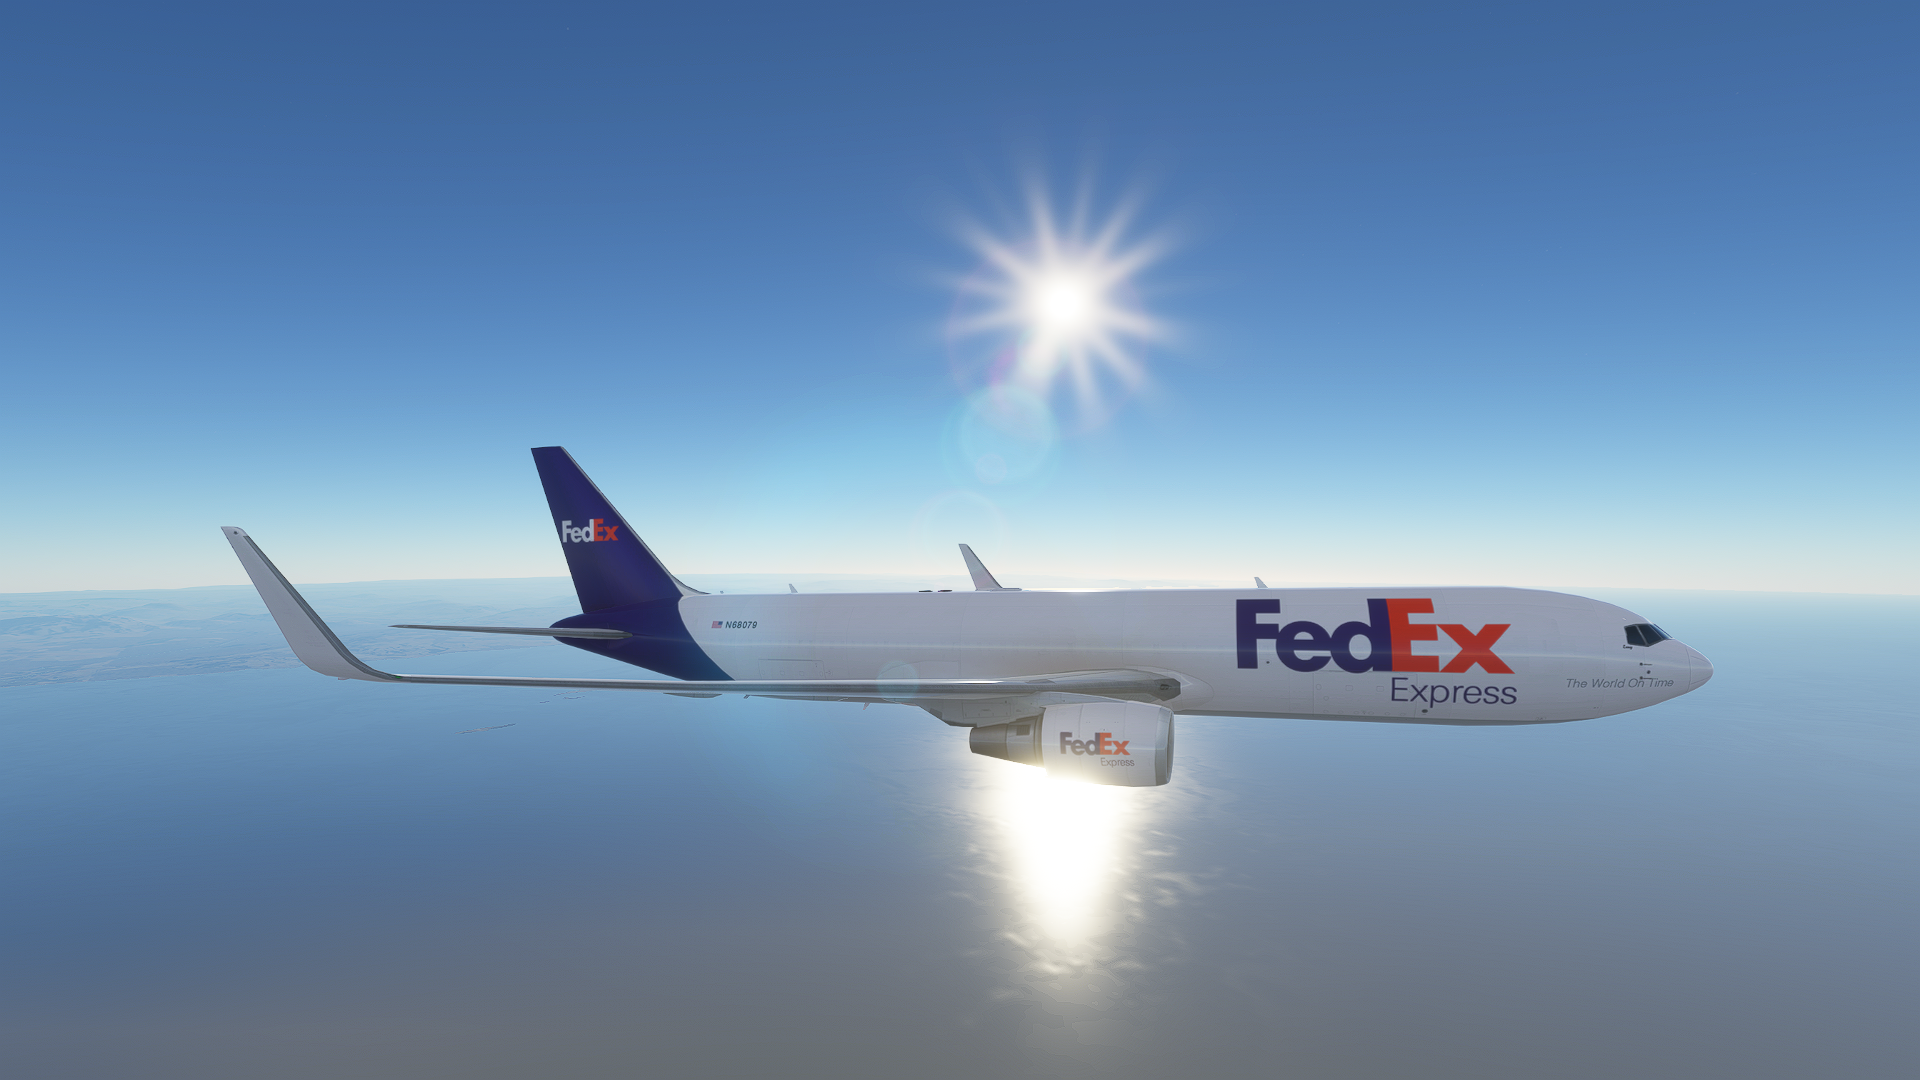 Msfs2020 - Freeware Boeing 767-300 Aircraft [Working Cockpit] V.1.0